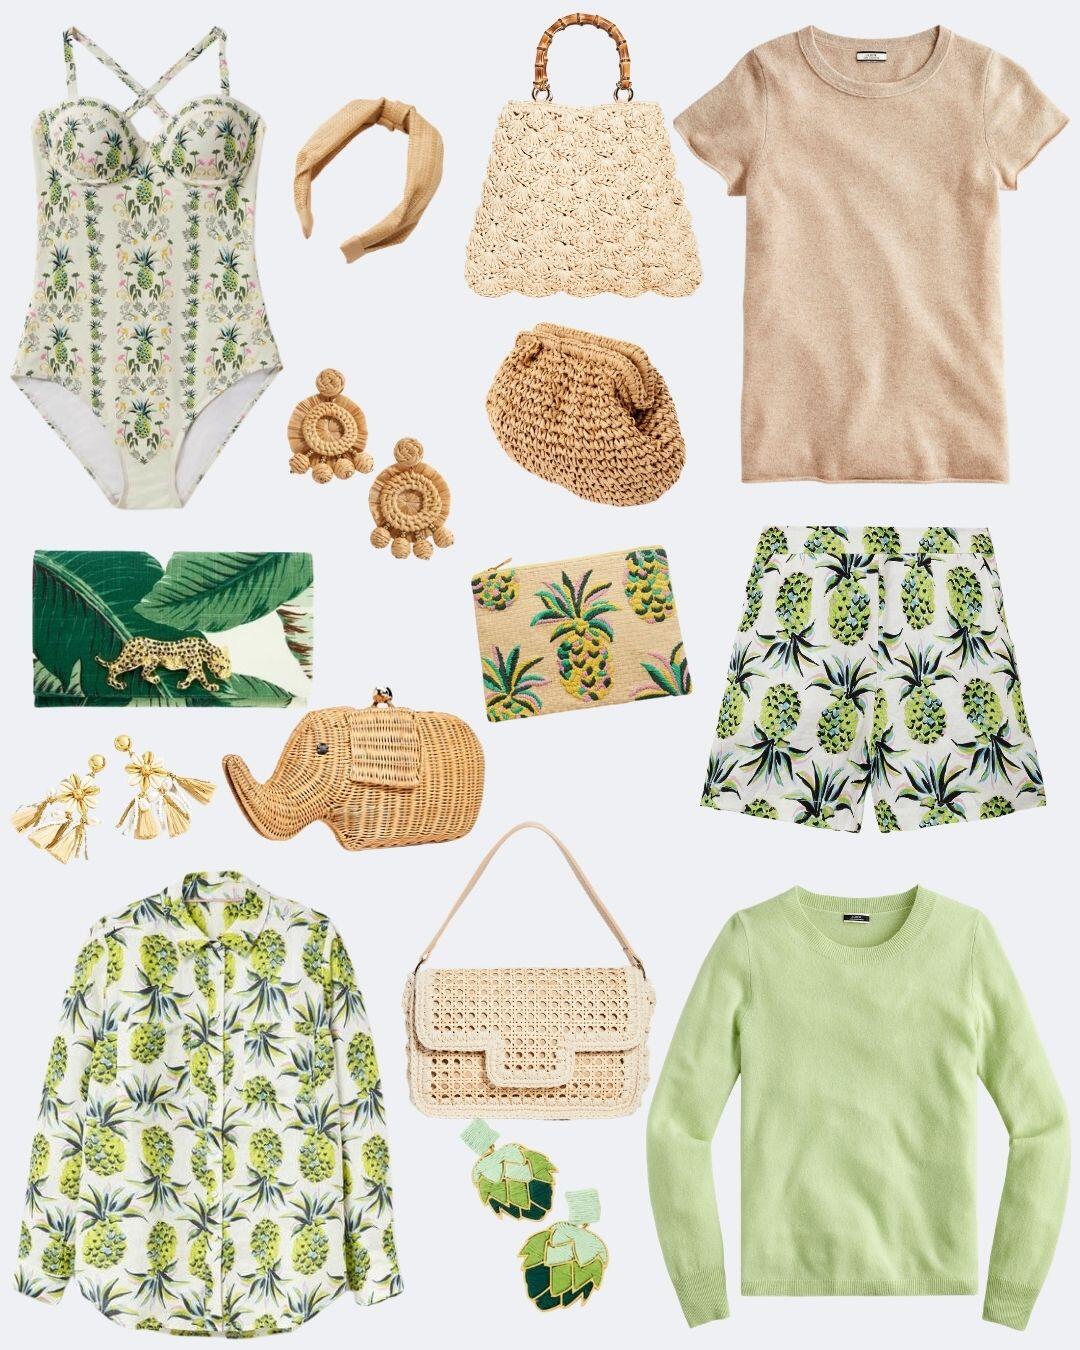 Mix tropical prints with mellow solids and textured raffia accessories for vacation style that is chic and understated.